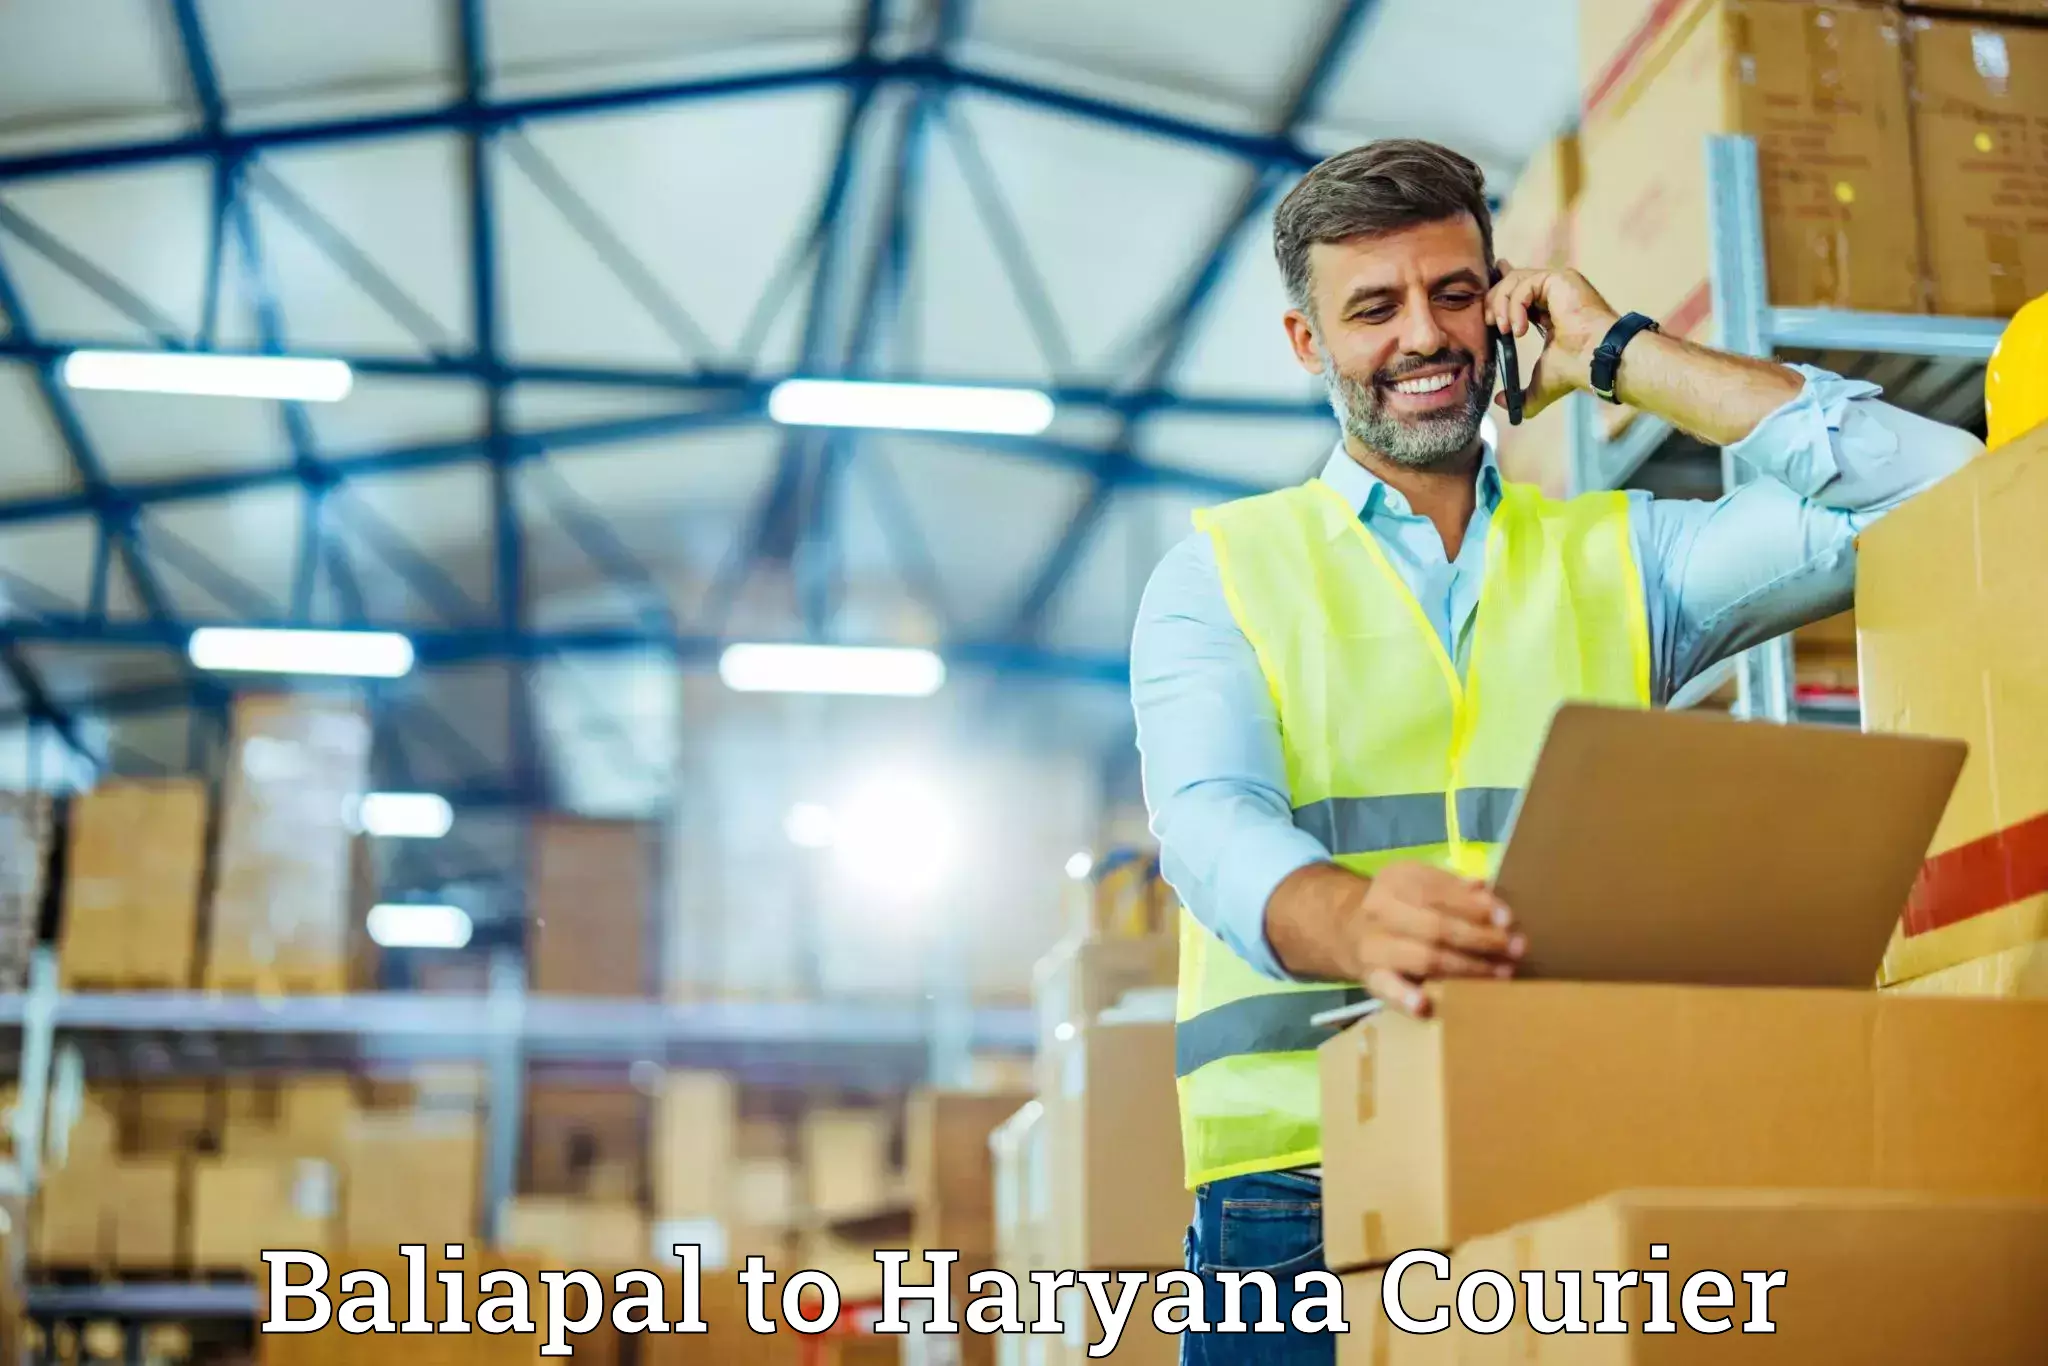 Trusted relocation experts Baliapal to Haryana